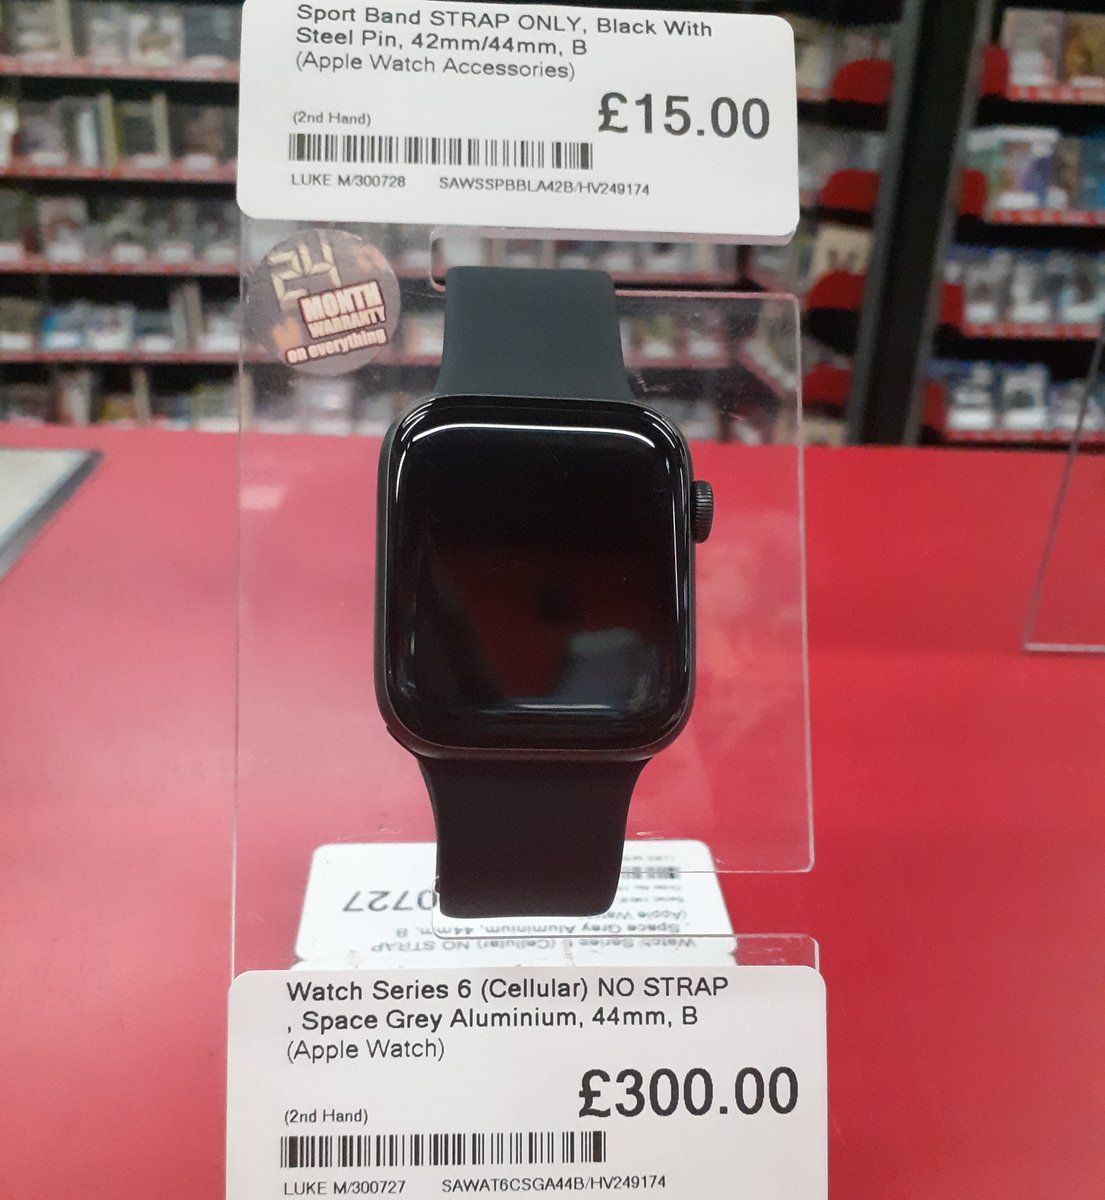 Looking to get fit? An Apple Watch a day keeps the doctor away! Check out this series 6 we have in stock right now!!

#cex #cexhinckley #twoyearwarranty #webuy #wesell #tradeandsave #shoplocal #castlestreet #technology #gaming #clickandcollect #apple #applewatch #keepfit #fitness